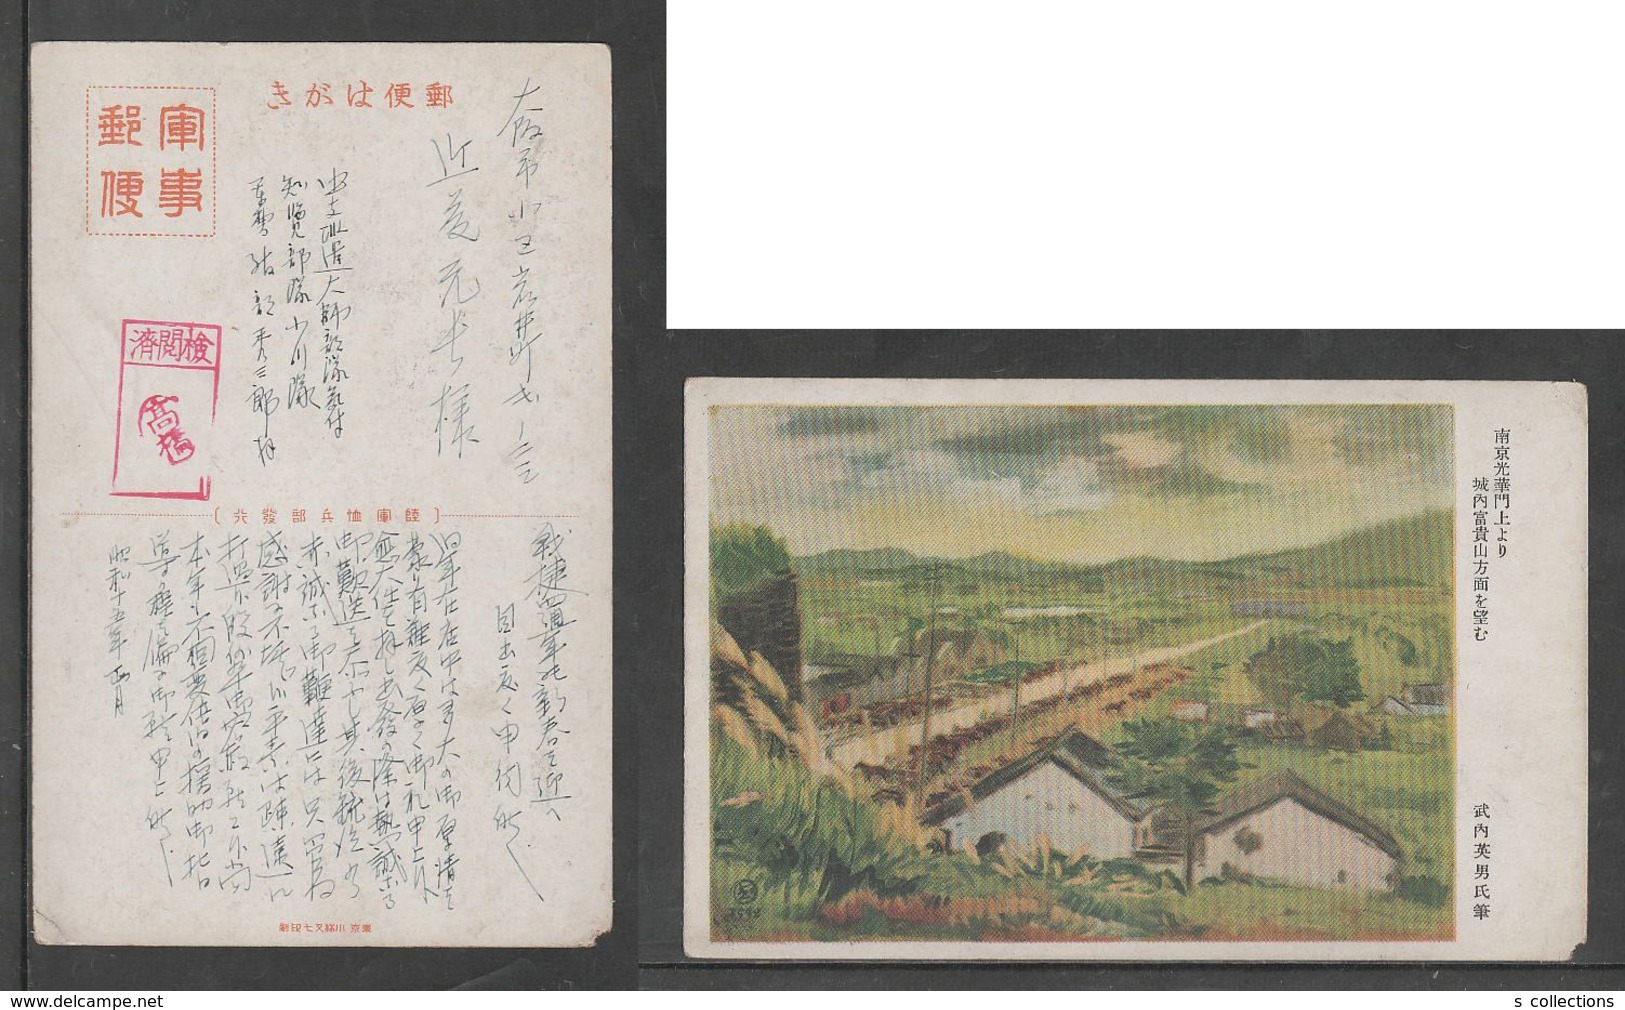 JAPAN WWII Military Nanjing Picture Postcard CENTRAL CHINA WW2 MANCHURIA CHINE MANDCHOUKOUO JAPON GIAPPONE - 1943-45 Shanghái & Nankín